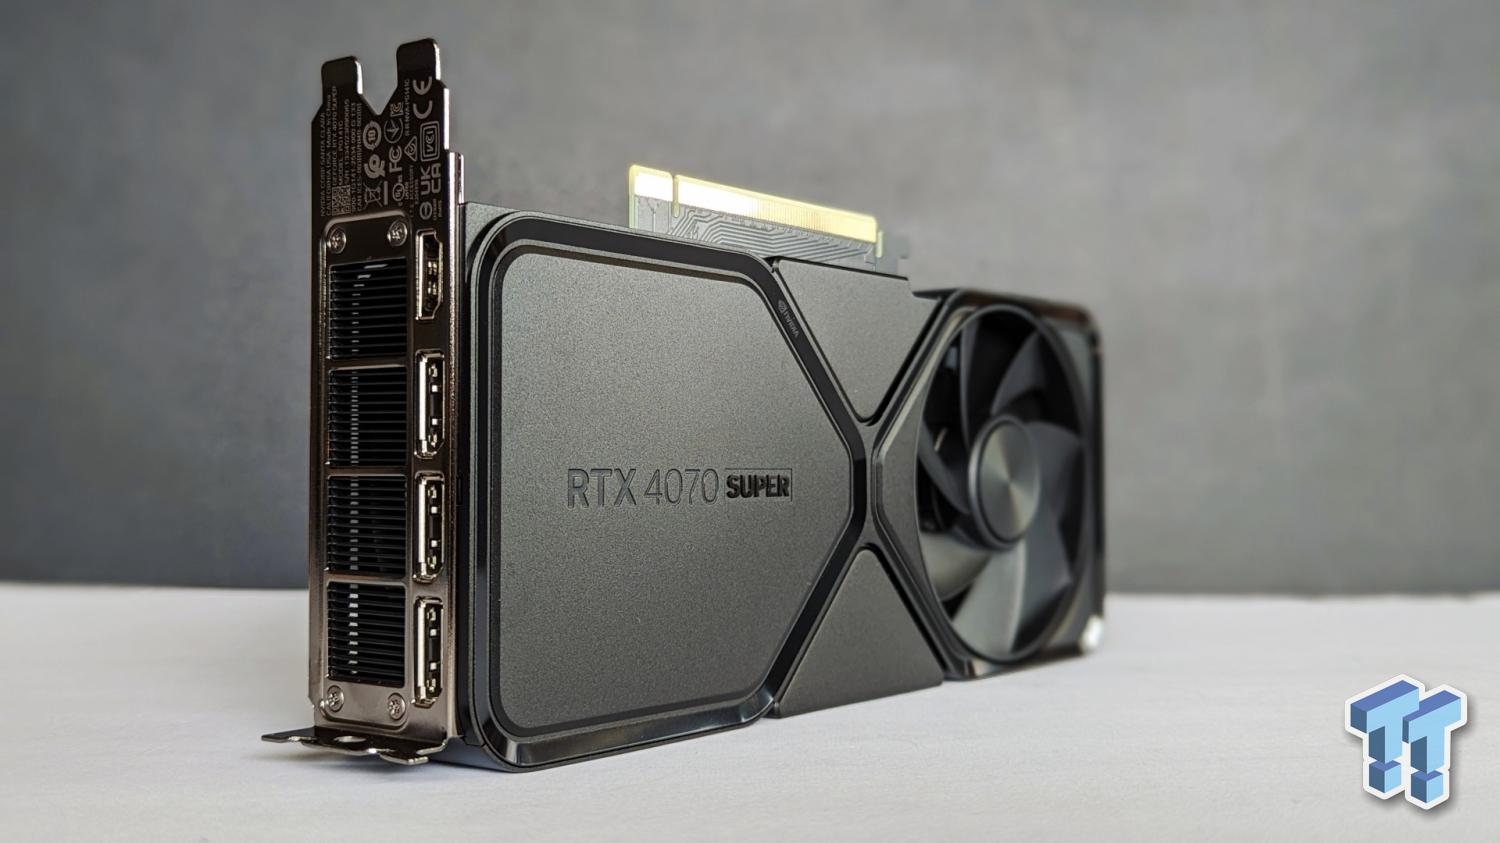 GeForce RTX 4070 Super is Nvidia's sexiest Founders Edition yet